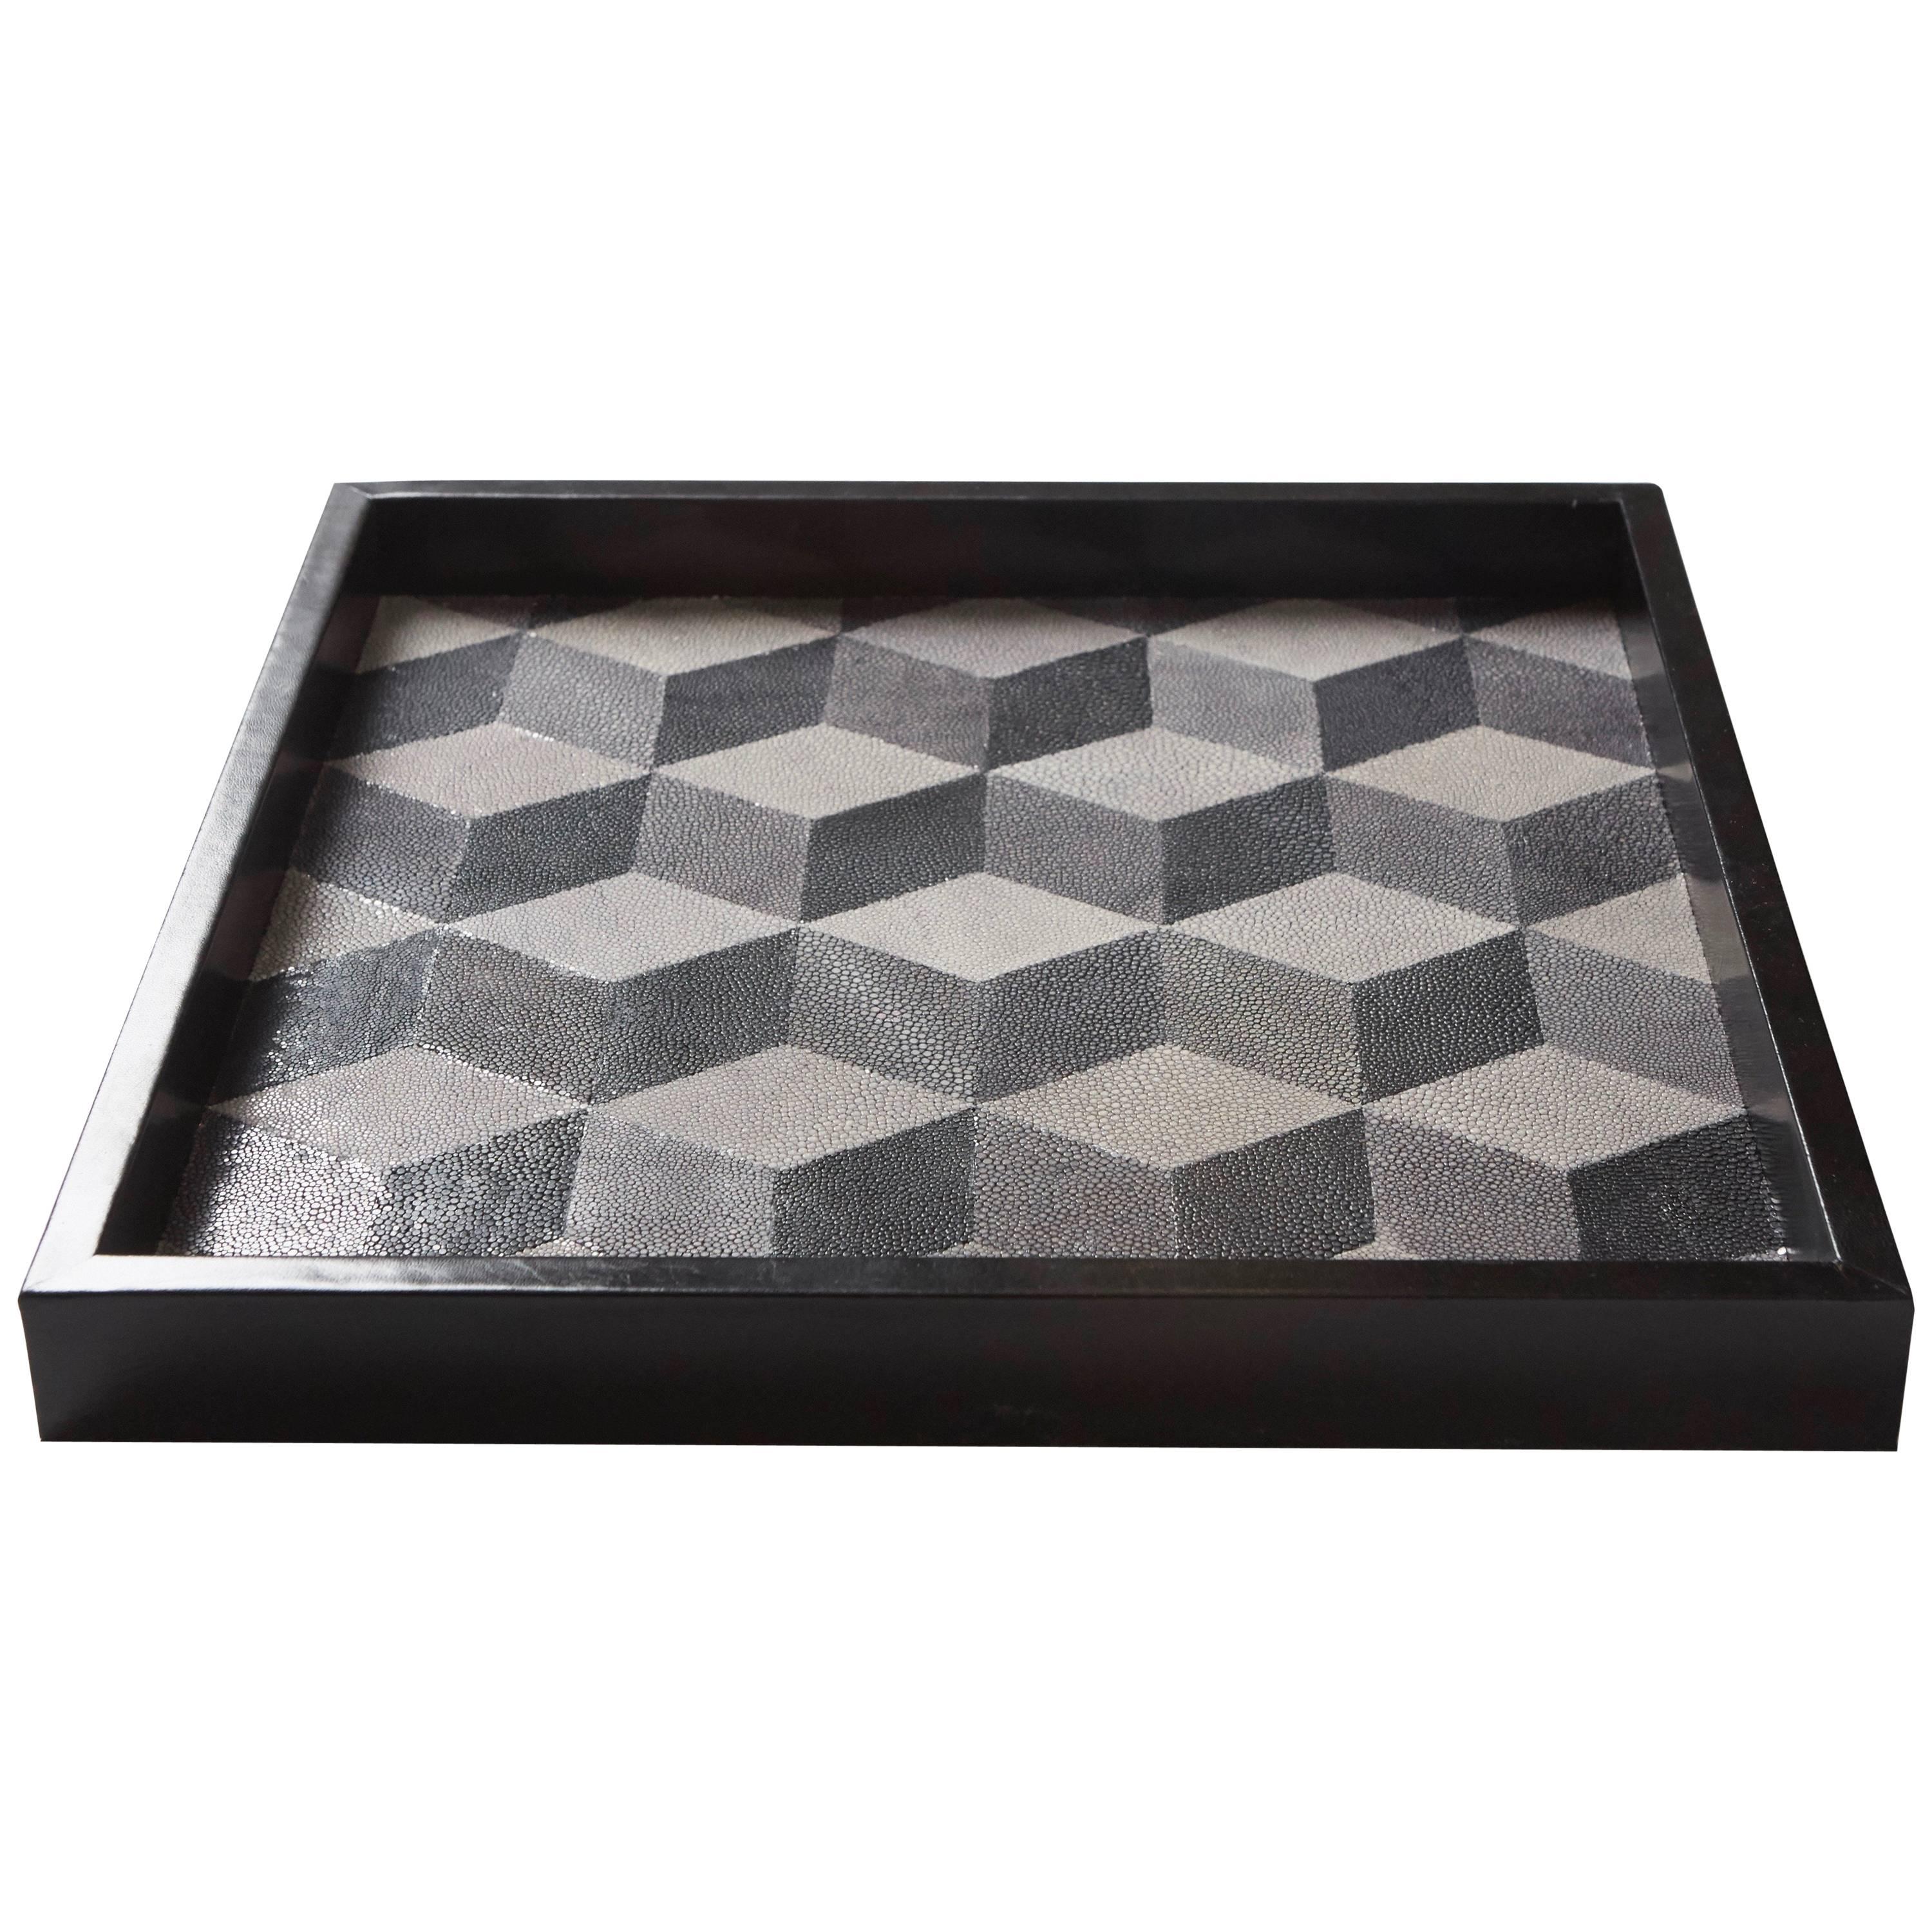 'Geo' Shagreen Tray, Shagreen Marquetry by Christina Z Antonio For Sale